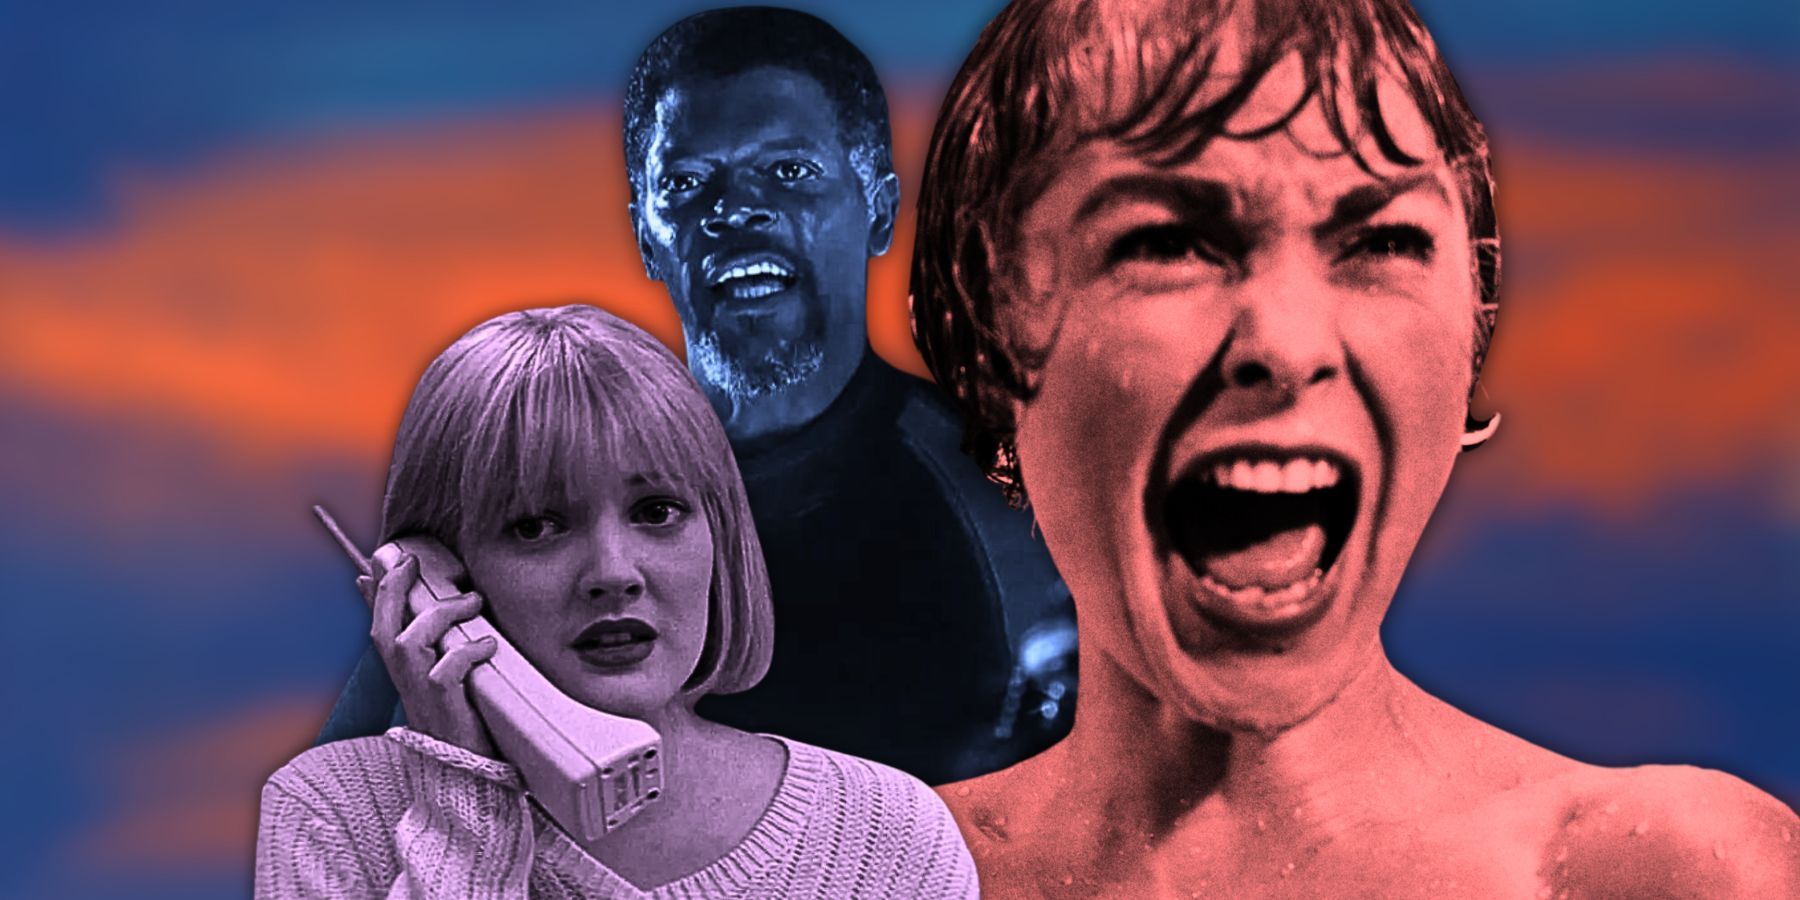 Drew Barrymore in Scream, Samuel L. Jackson in Deep Blue Sea, and Janet Leigh in Psycho collage